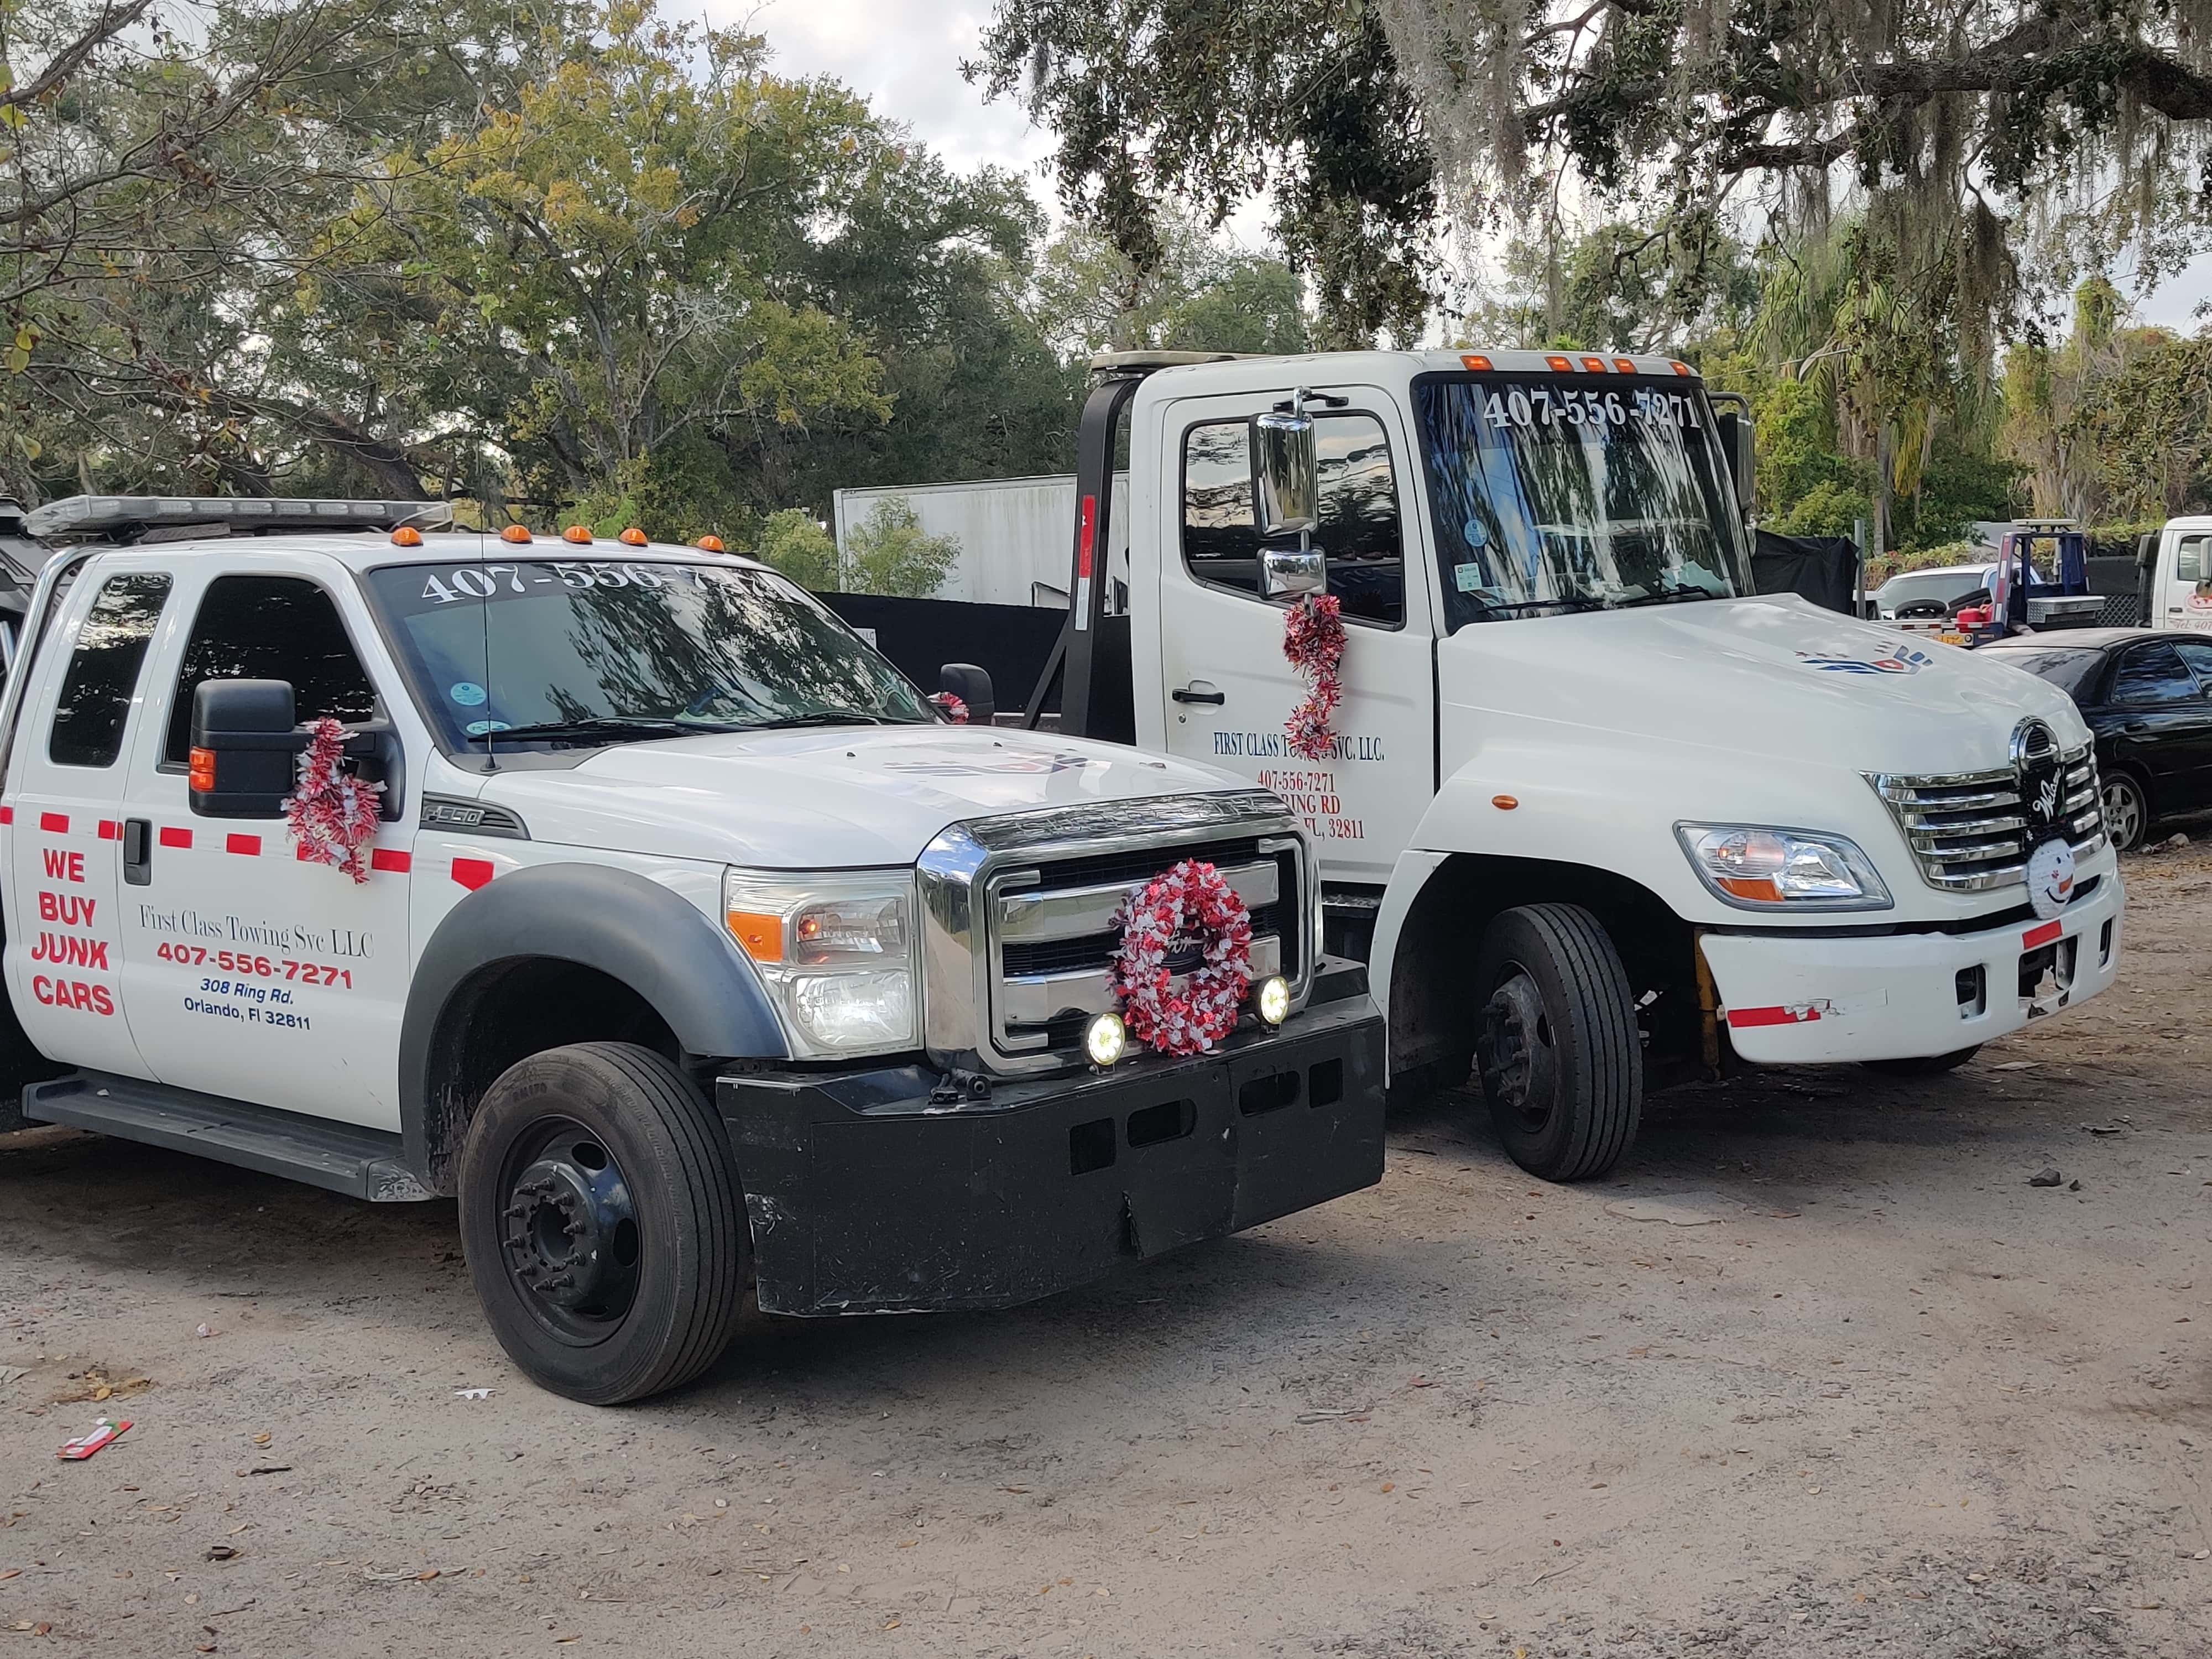 first class towing service LLC - Orlando, FL, US, auto towing